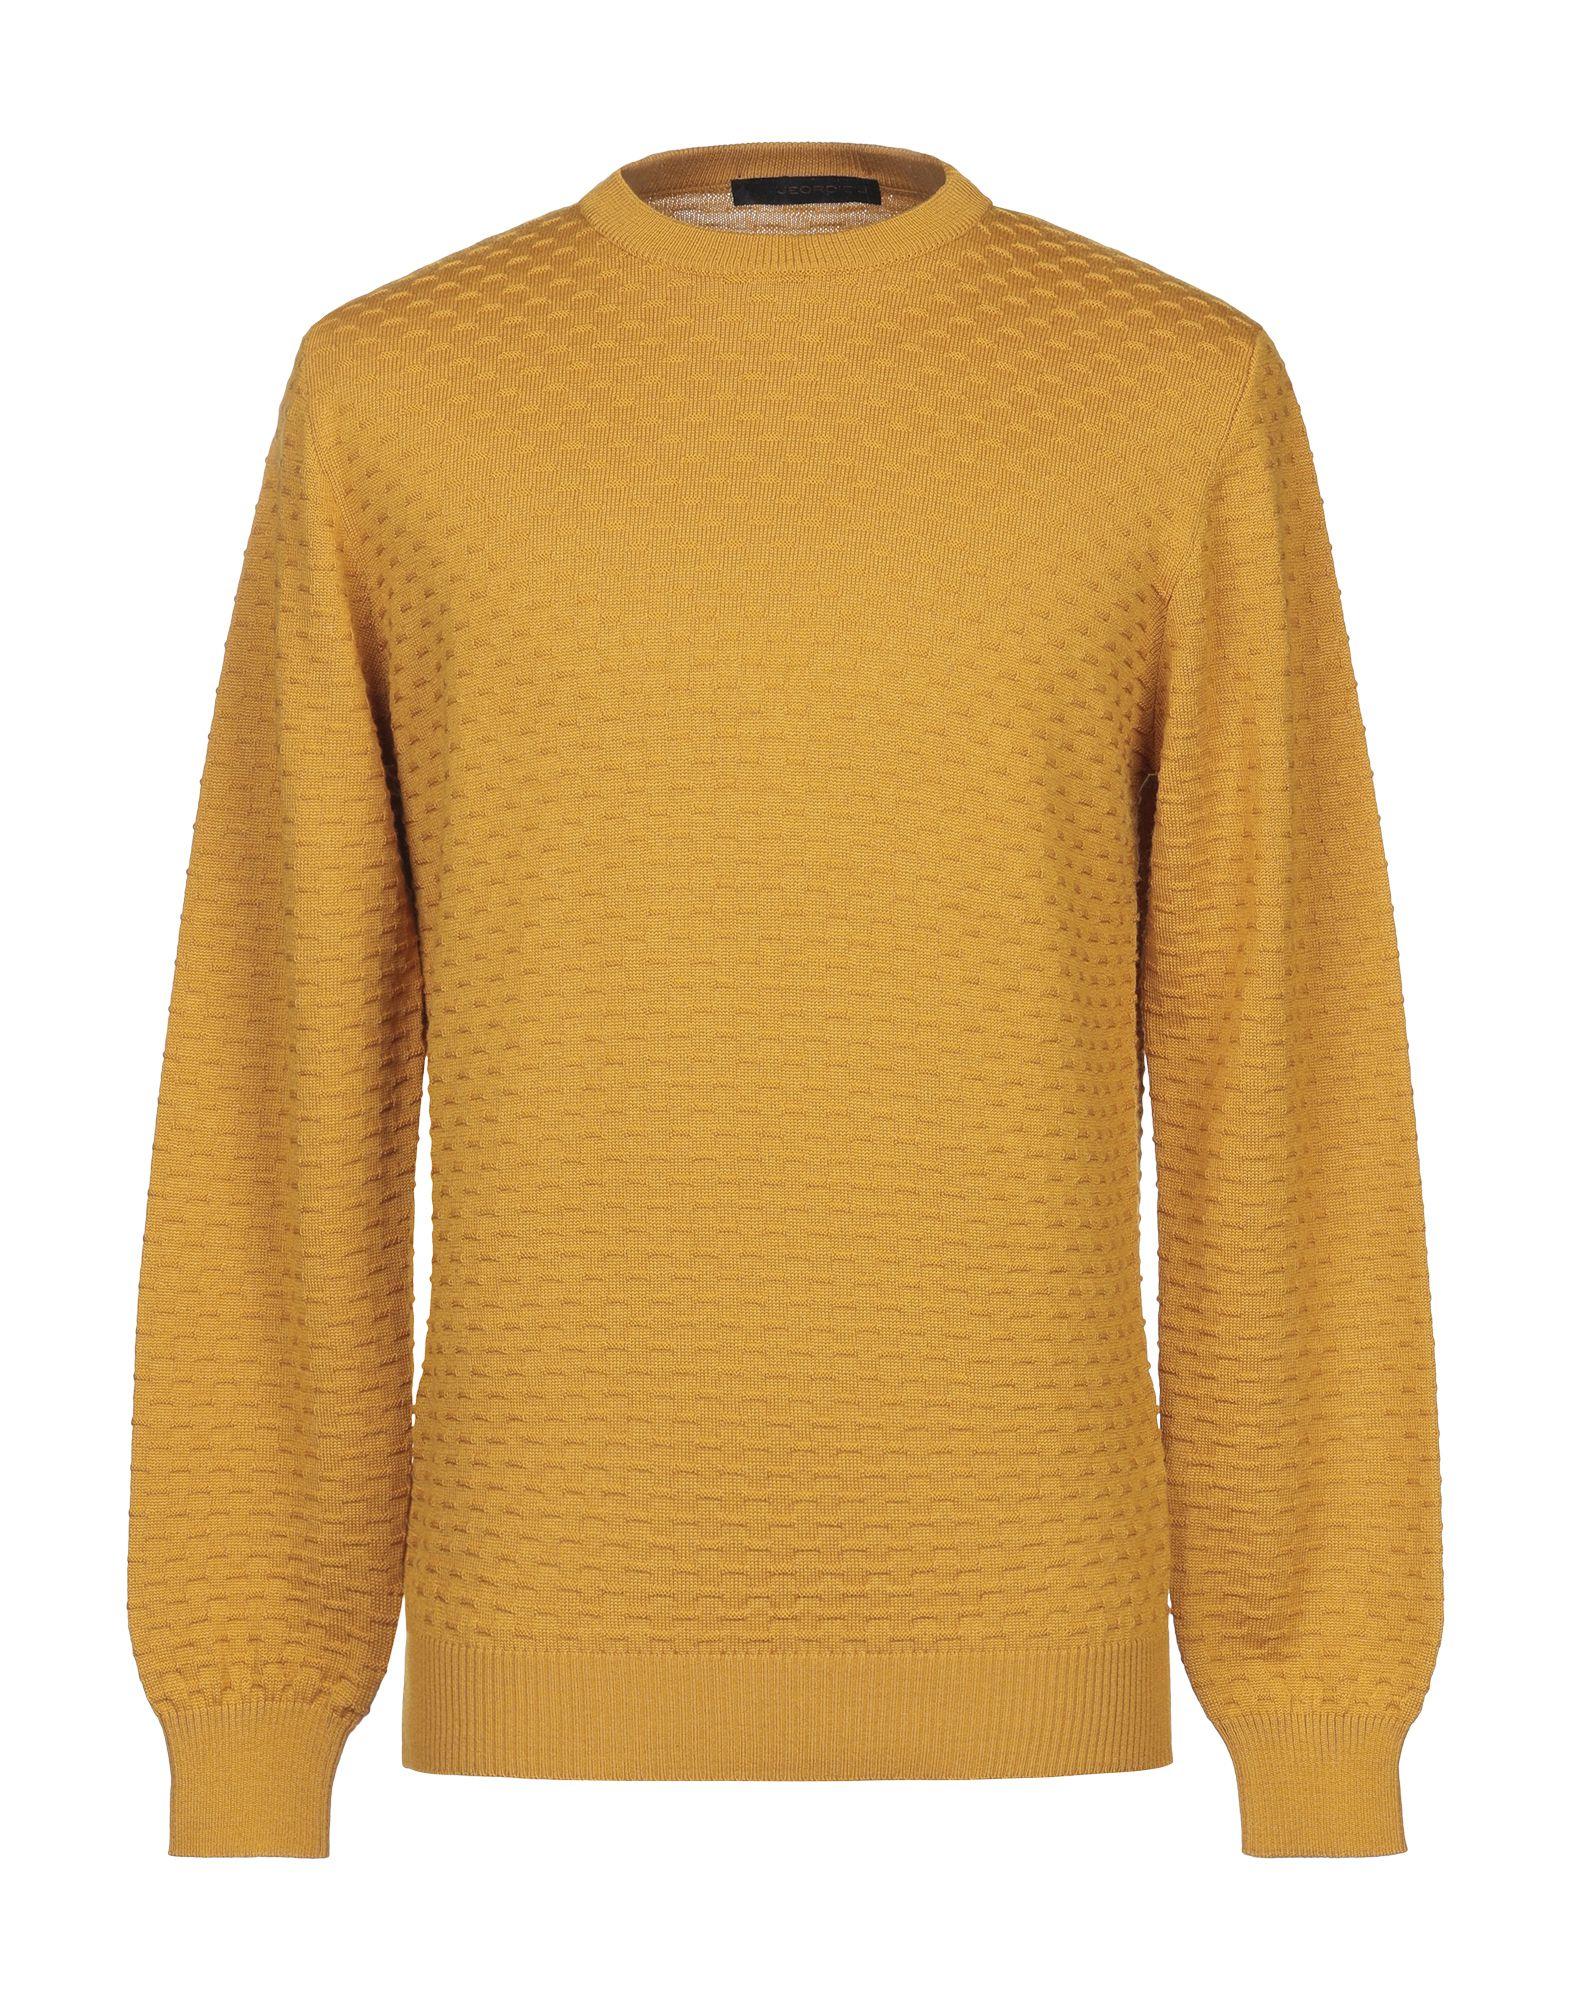 Jeordie's Wool Sweater in Yellow for Men - Lyst